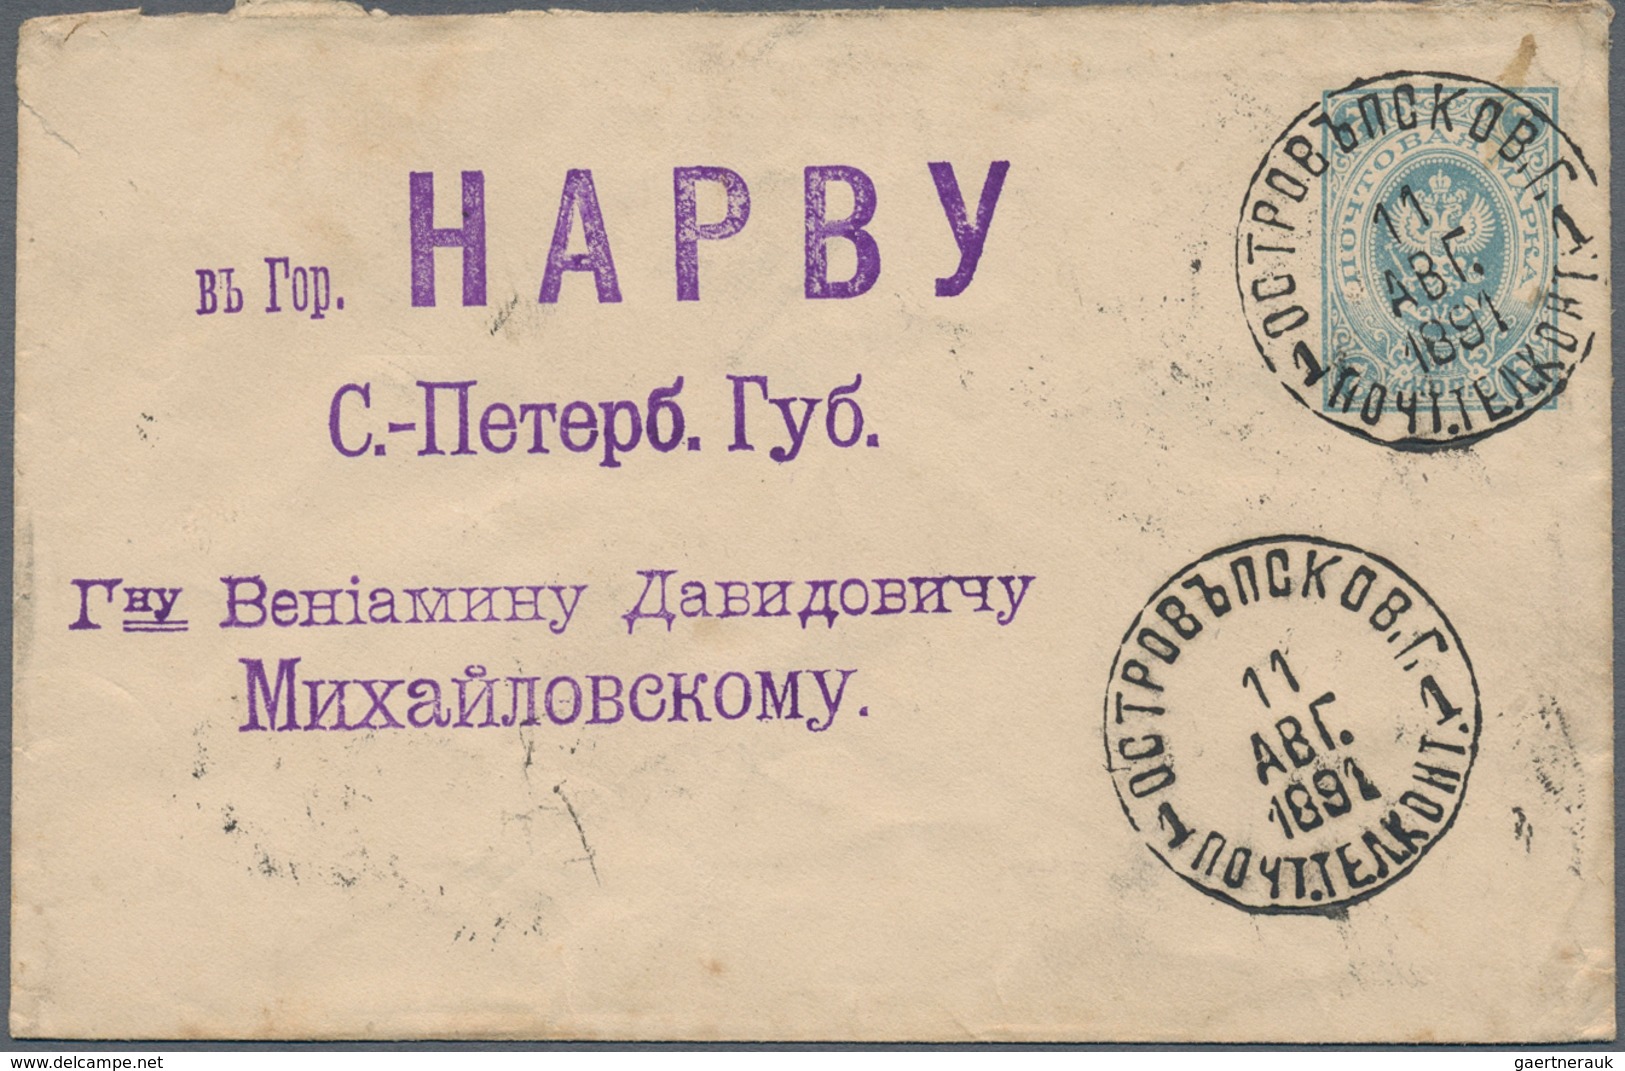 Russland: 1875/1990 ancient holding of ca. 1.070 letters, cards, forms and postal stationeries (post